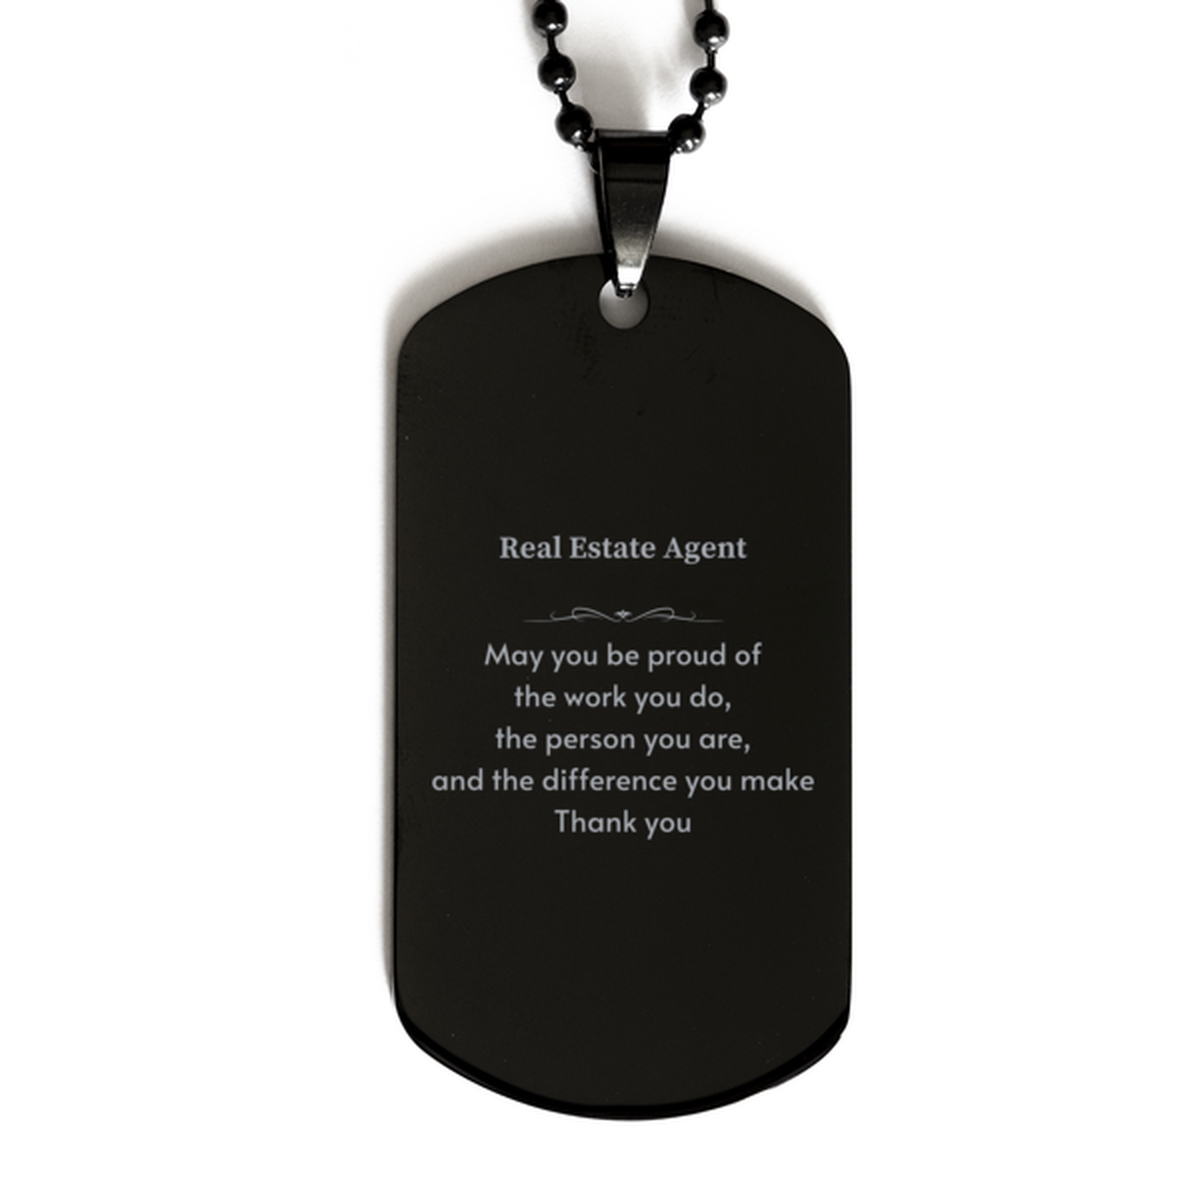 Heartwarming Black Dog Tag Retirement Coworkers Gifts for Real Estate Agent, Real Estate Agent May You be proud of the work you do, the person you are Gifts for Boss Men Women Friends